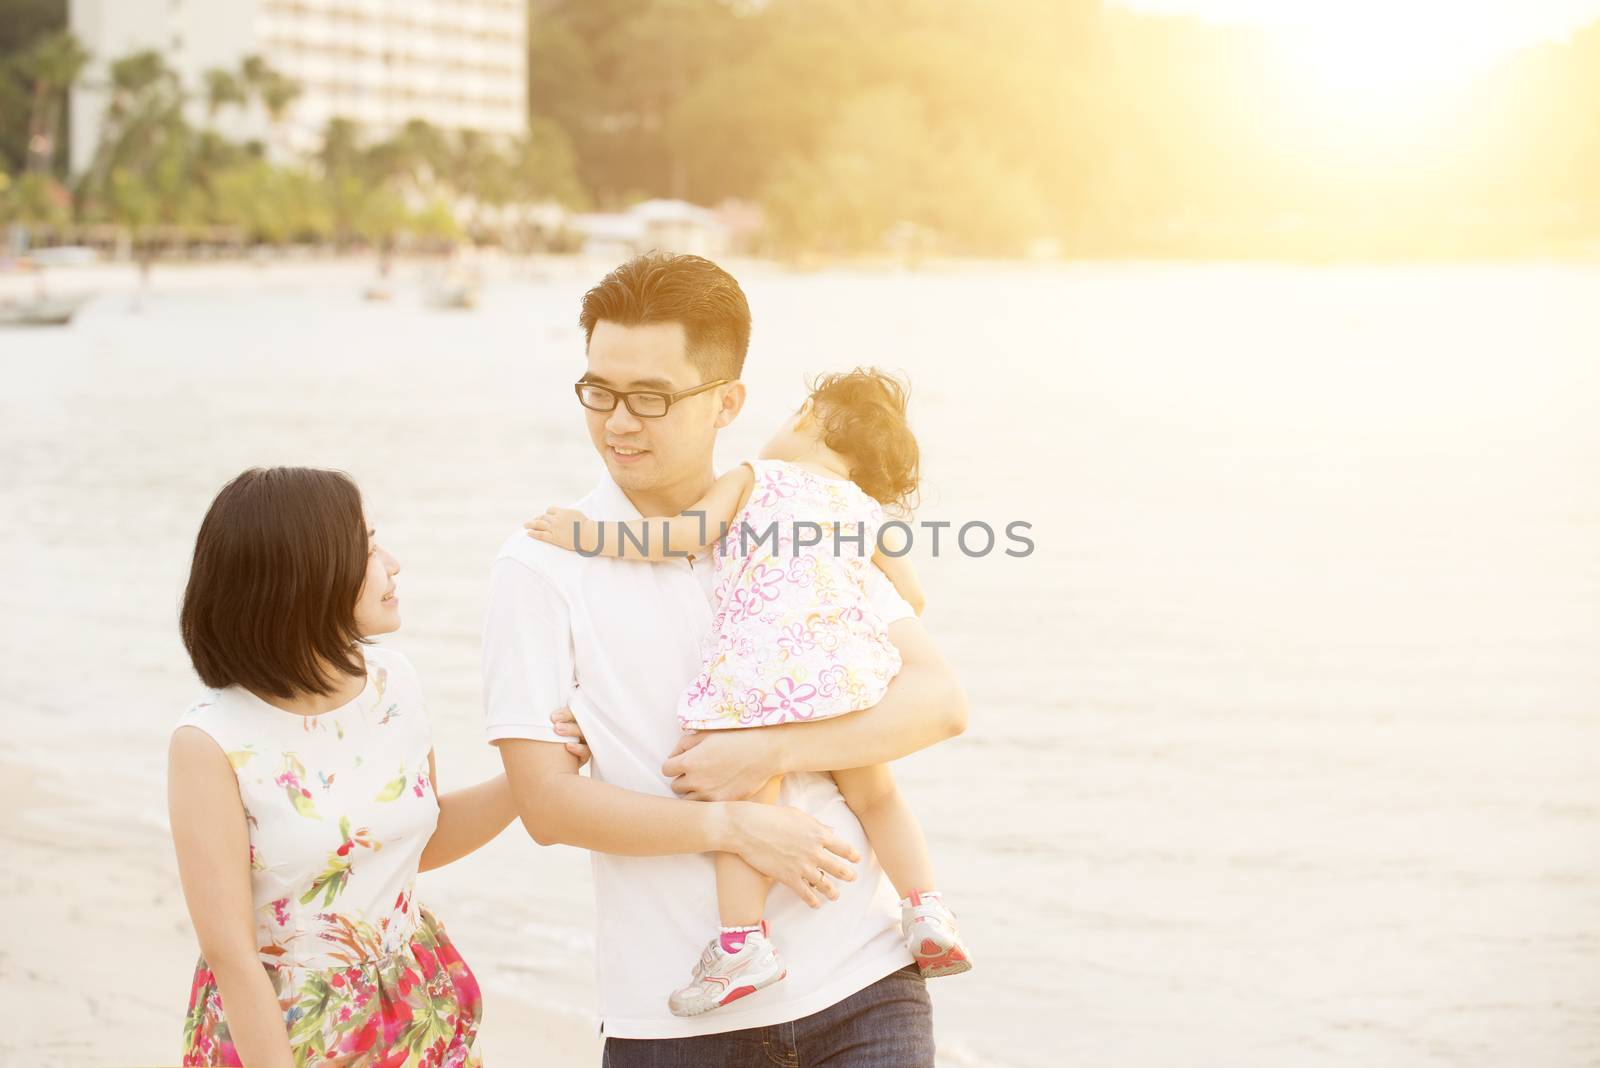 Portrait of happy family enjoying outdoor activity together, walking on coastline in beautiful sunset during holiday vacations.